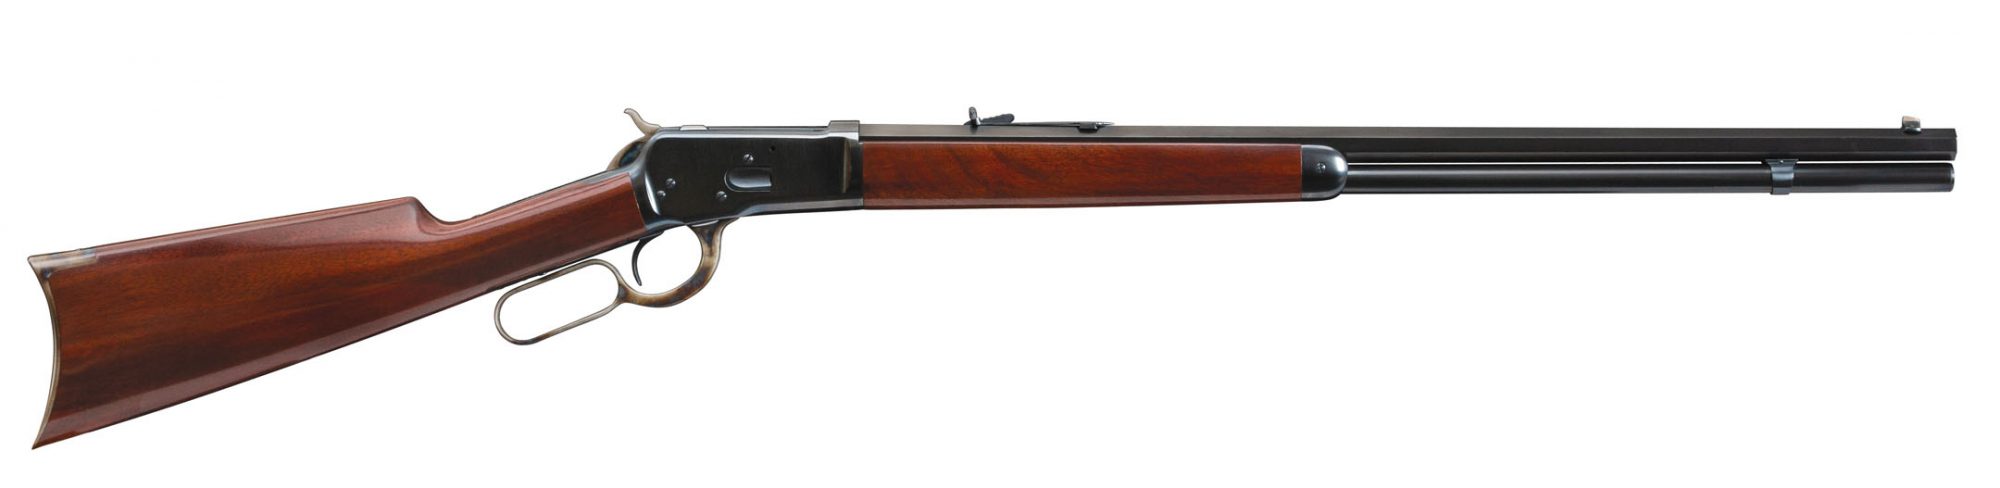 Photo of a restored Winchester Model 1892 from 1900, restored in 2019 by Turnbull Restoration Co. of Bloomfield, NY